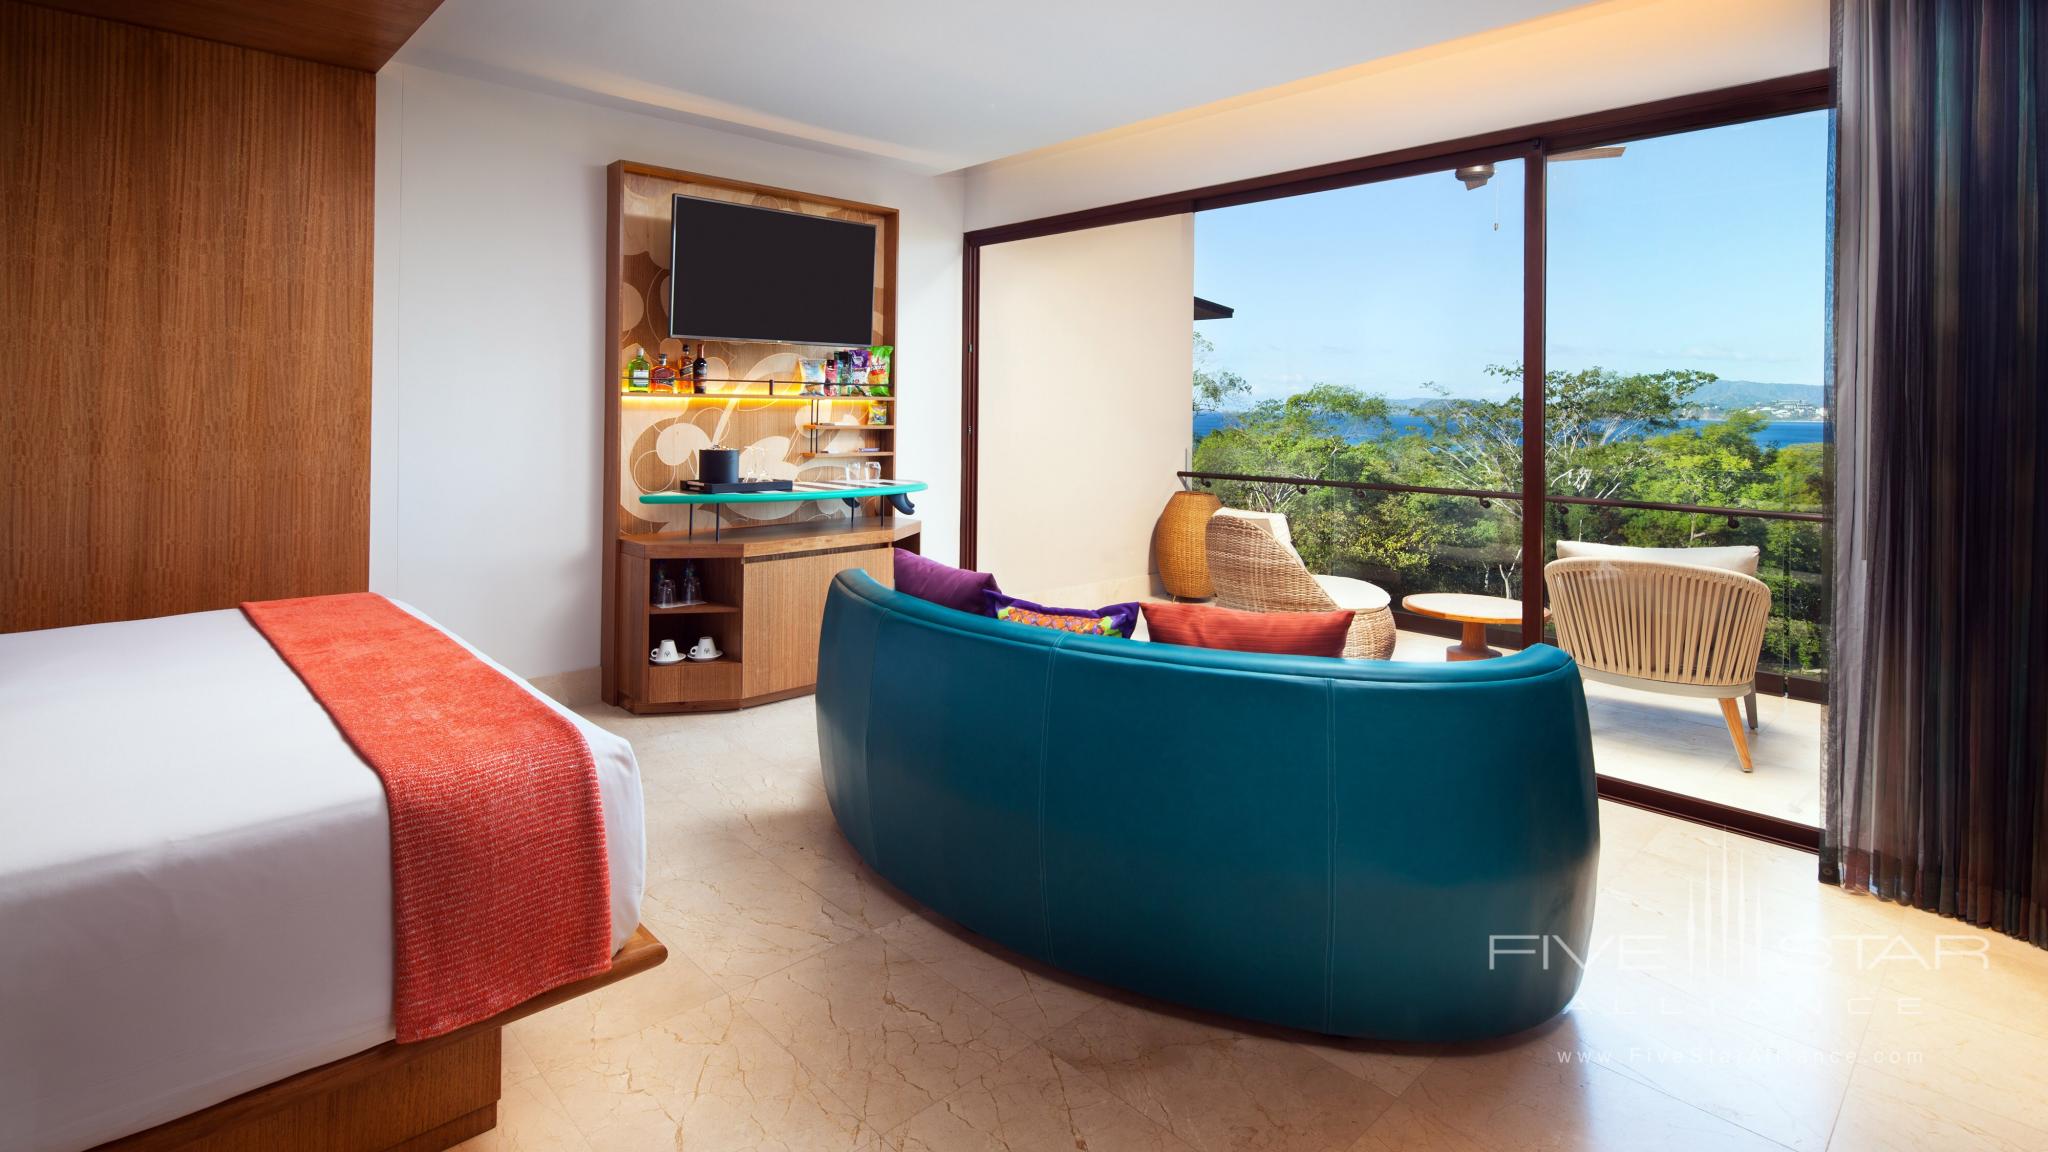 King Fabulous Guestroom at W Costa Rica Reserva Conchal